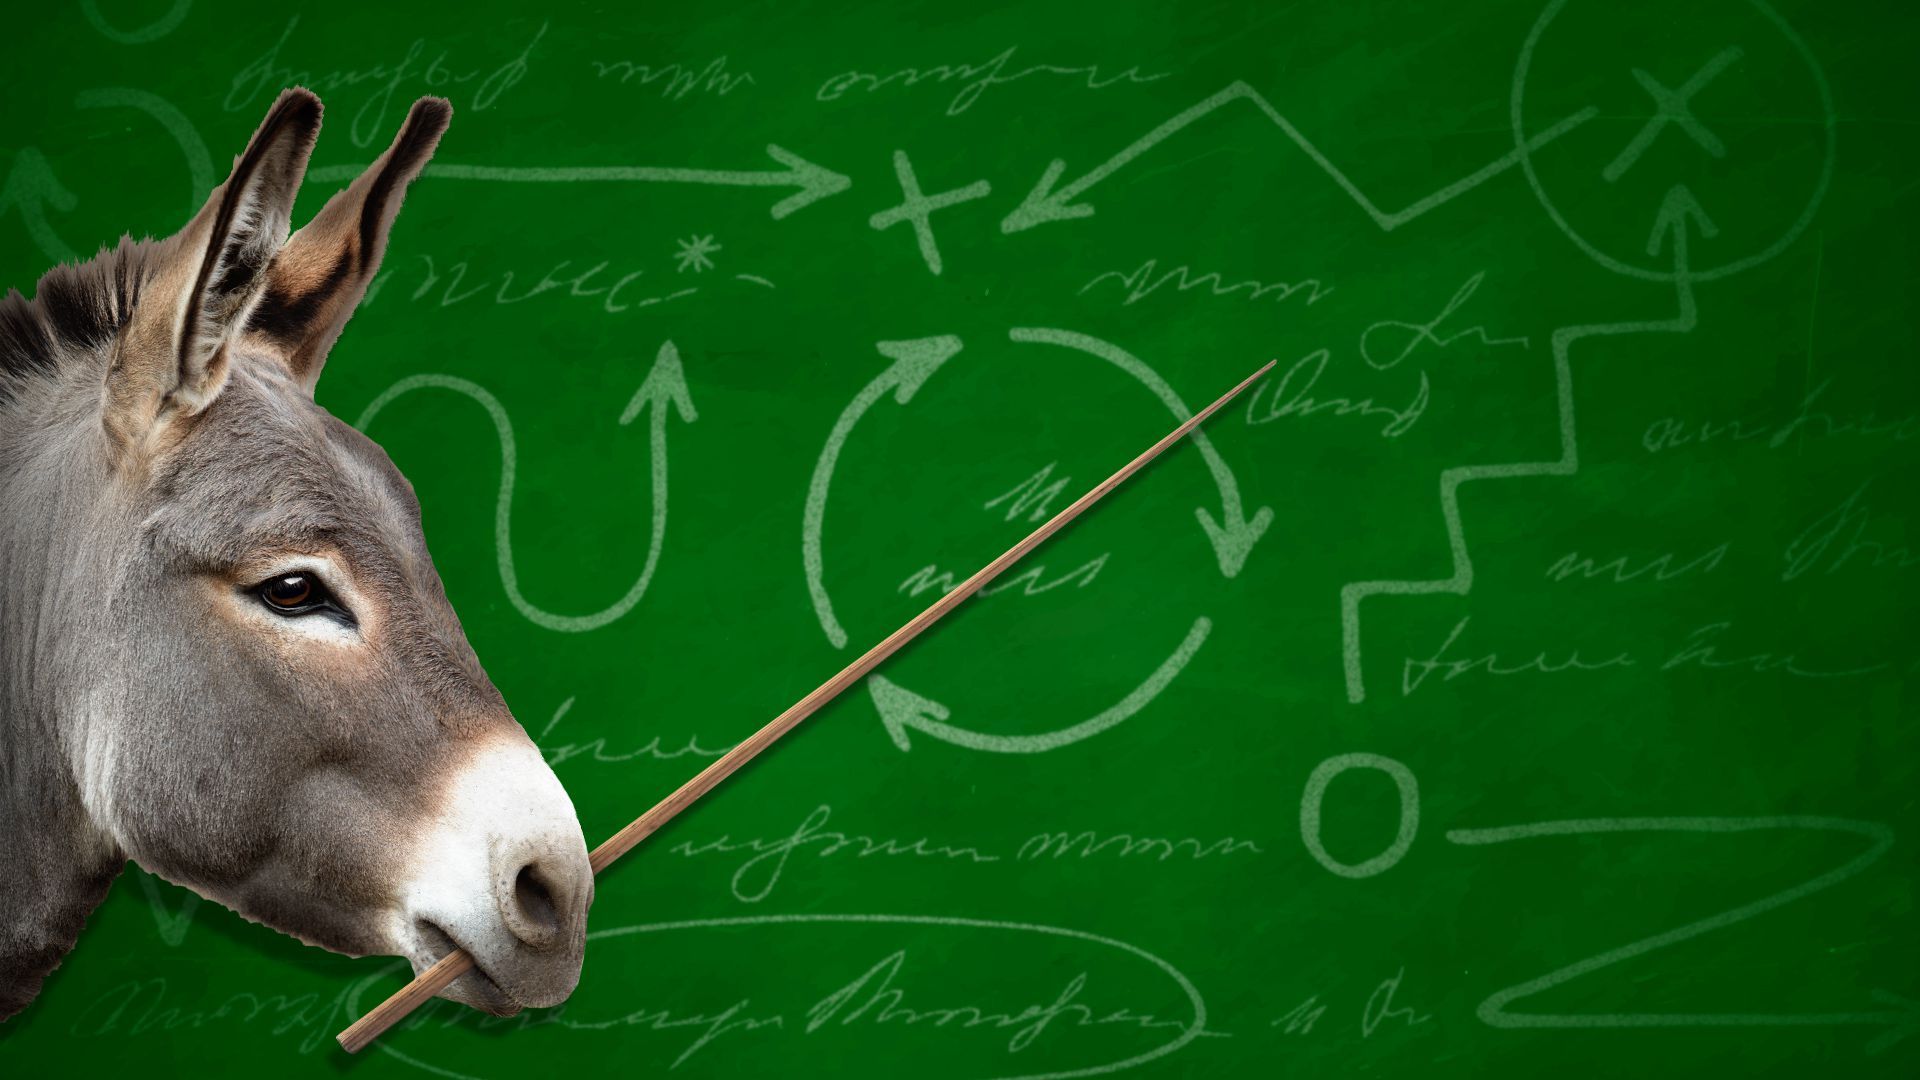 Illustration of a donkey holding a teacher's stick, pointing at a background full of complicated diagrams and text. 